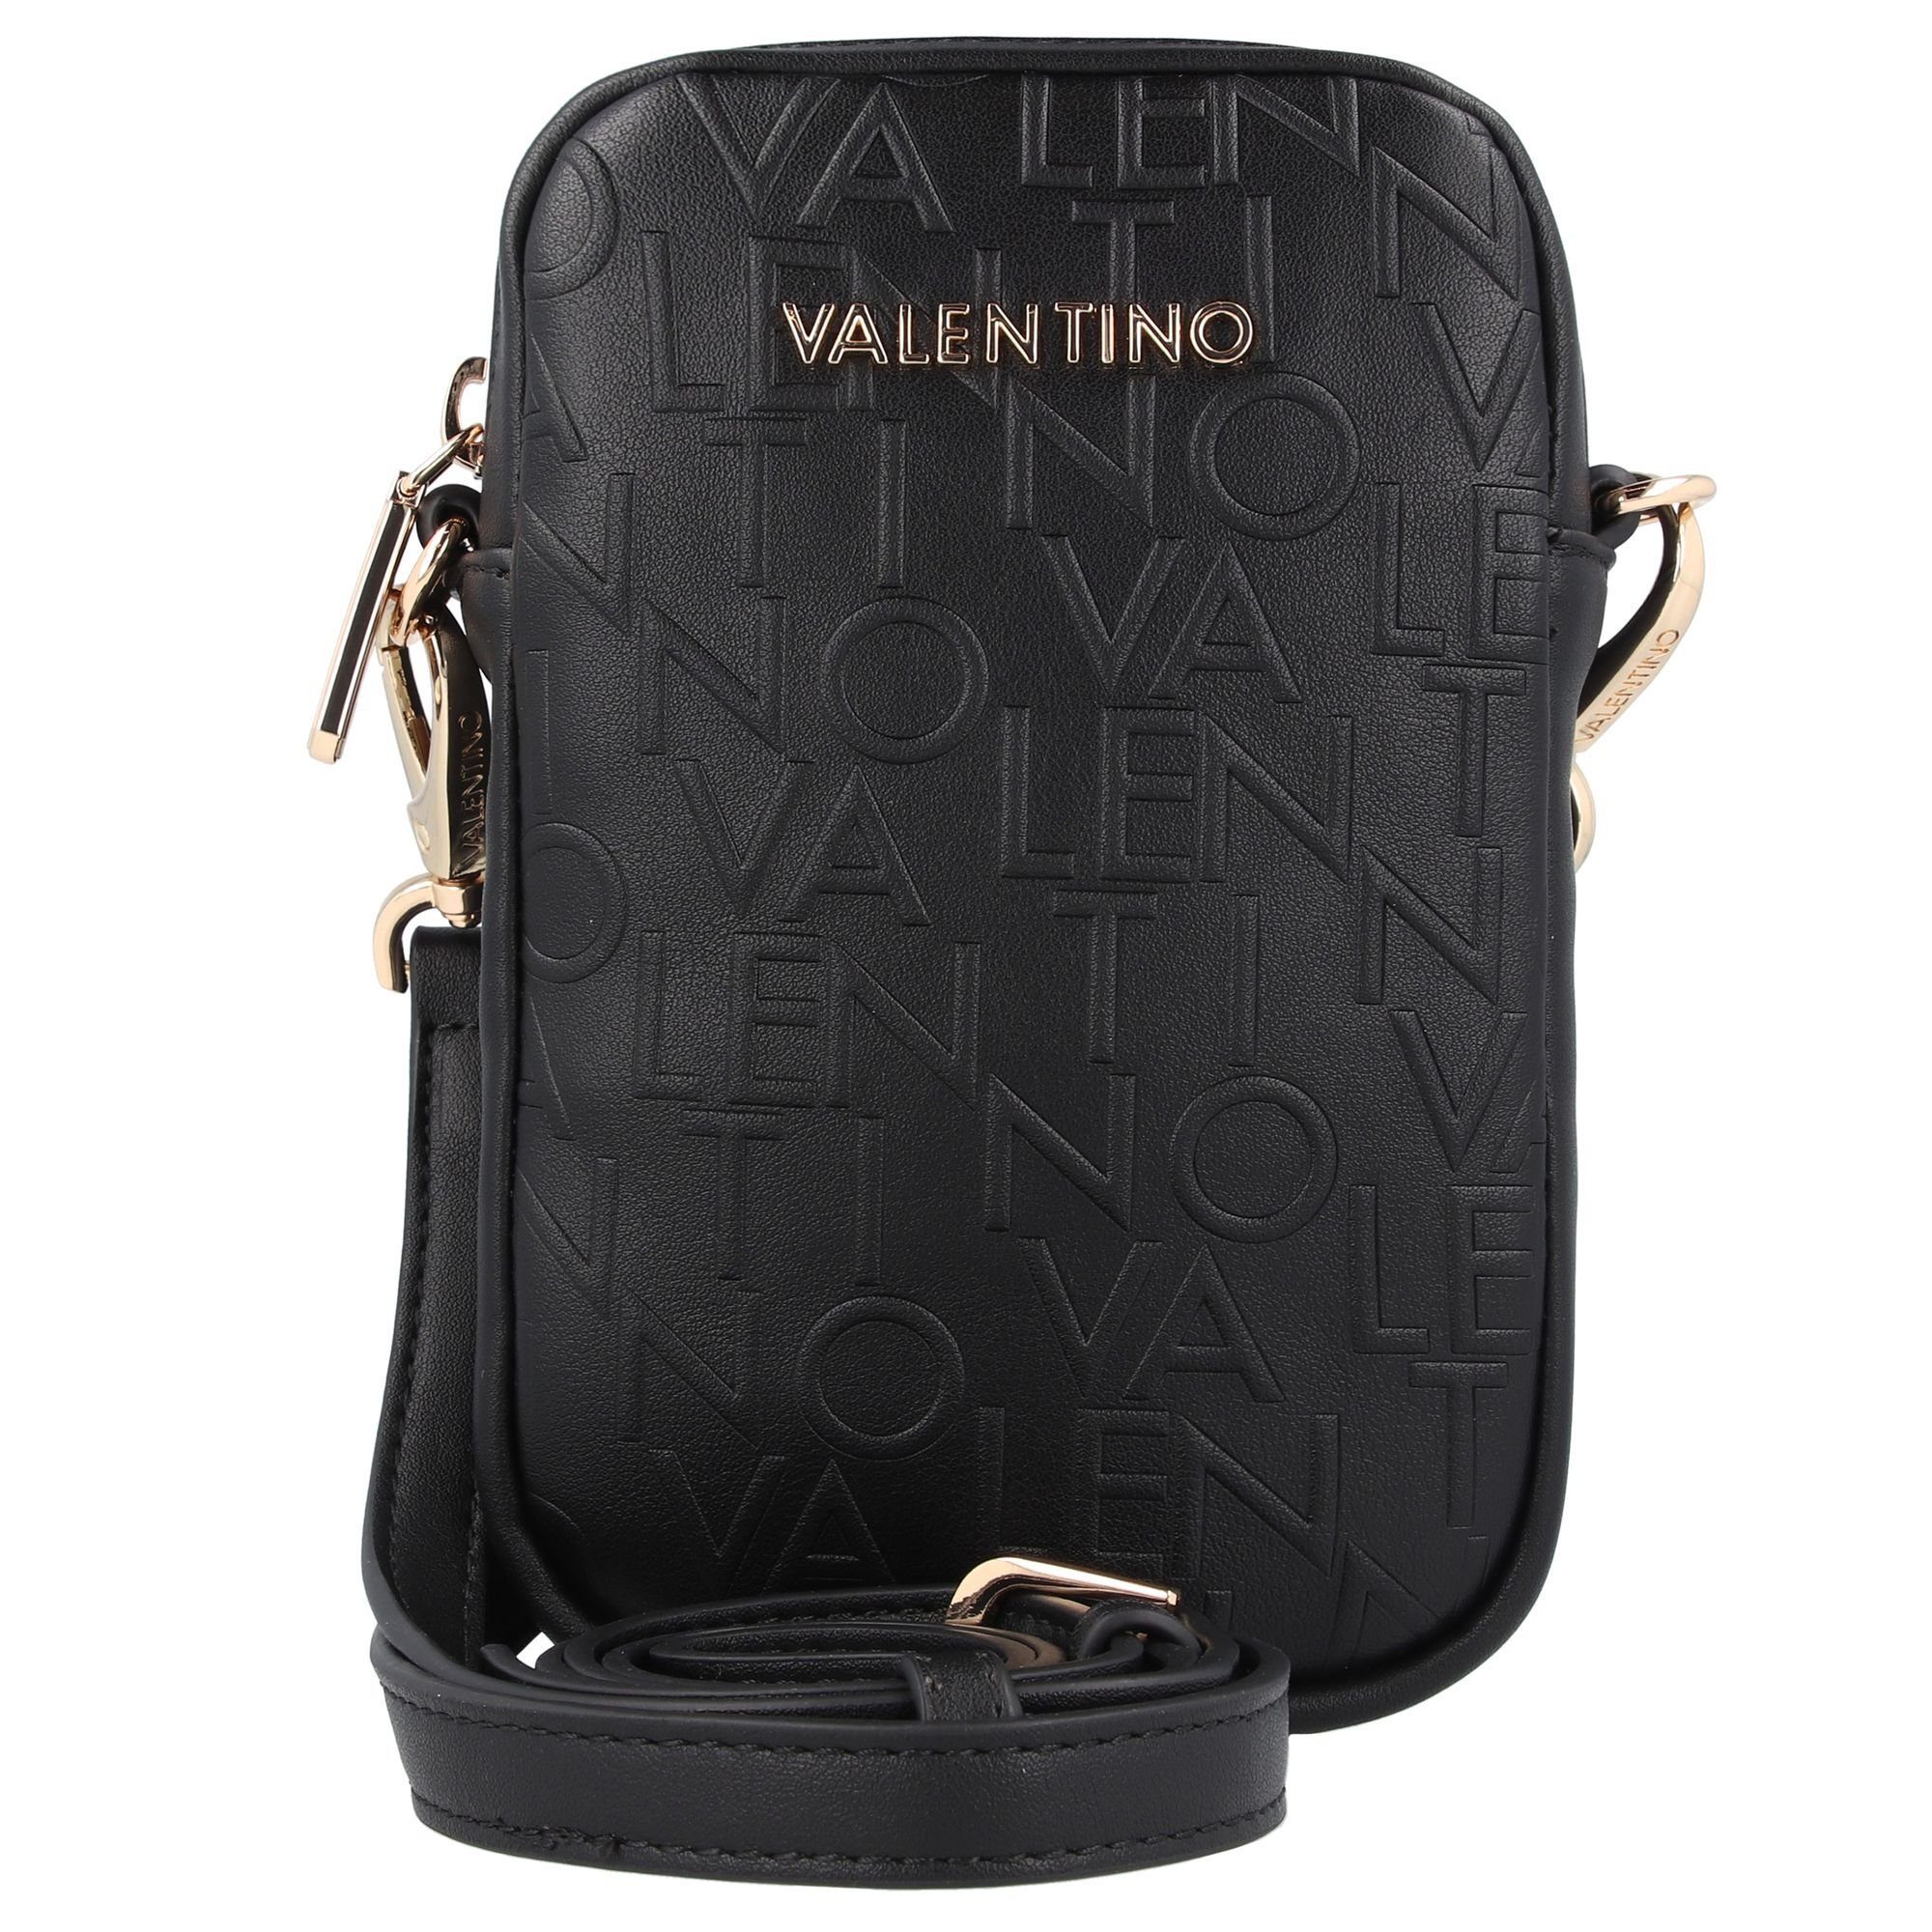 VALENTINO BAGS Smartphone-Hülle Relax, Polyurethan